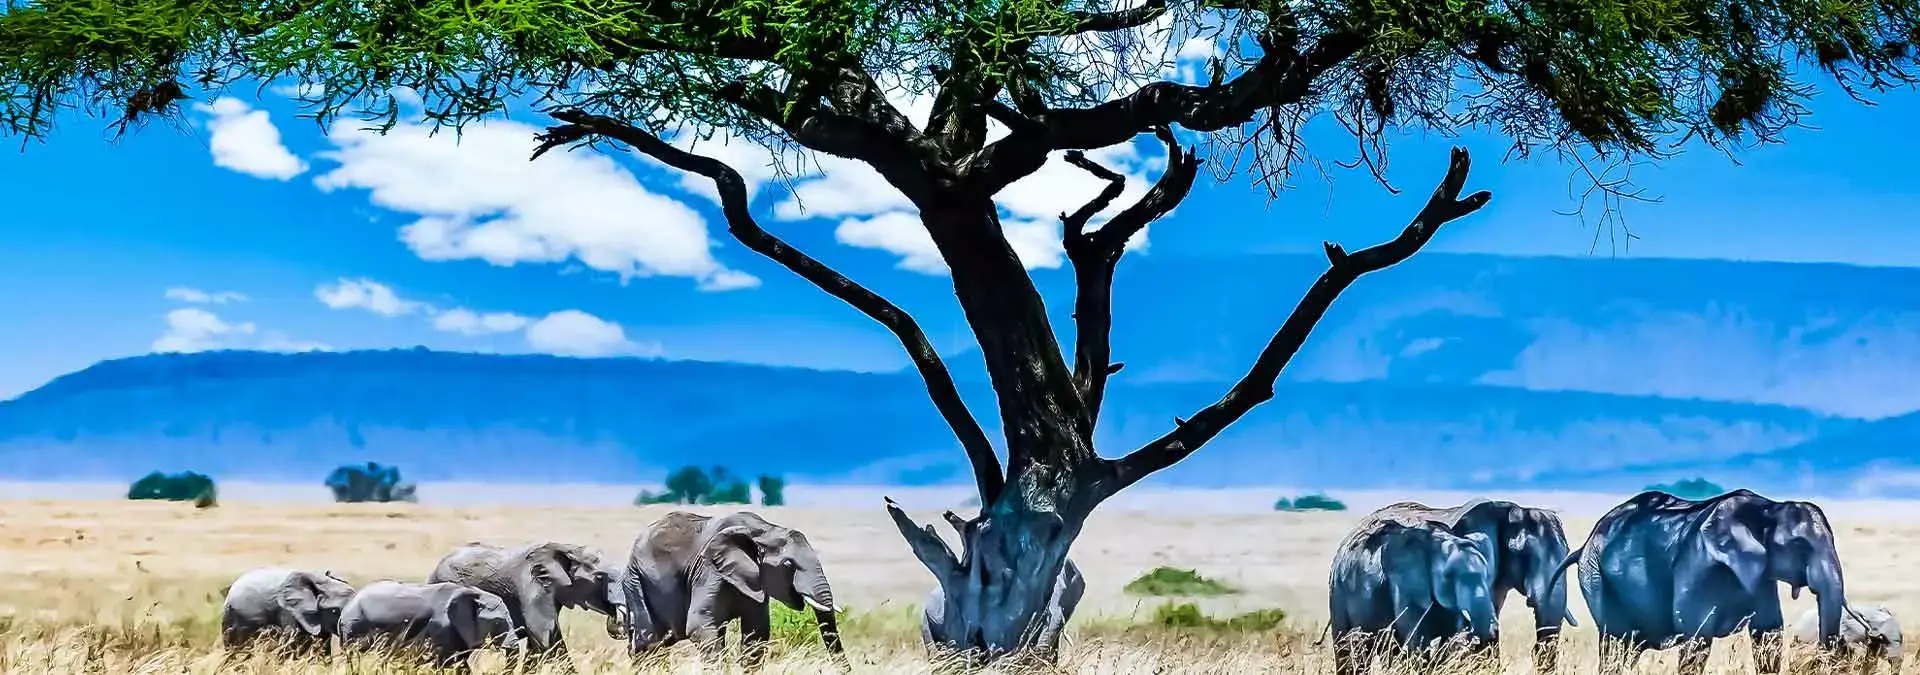 A group of elephants under a big green tree in the wilderness